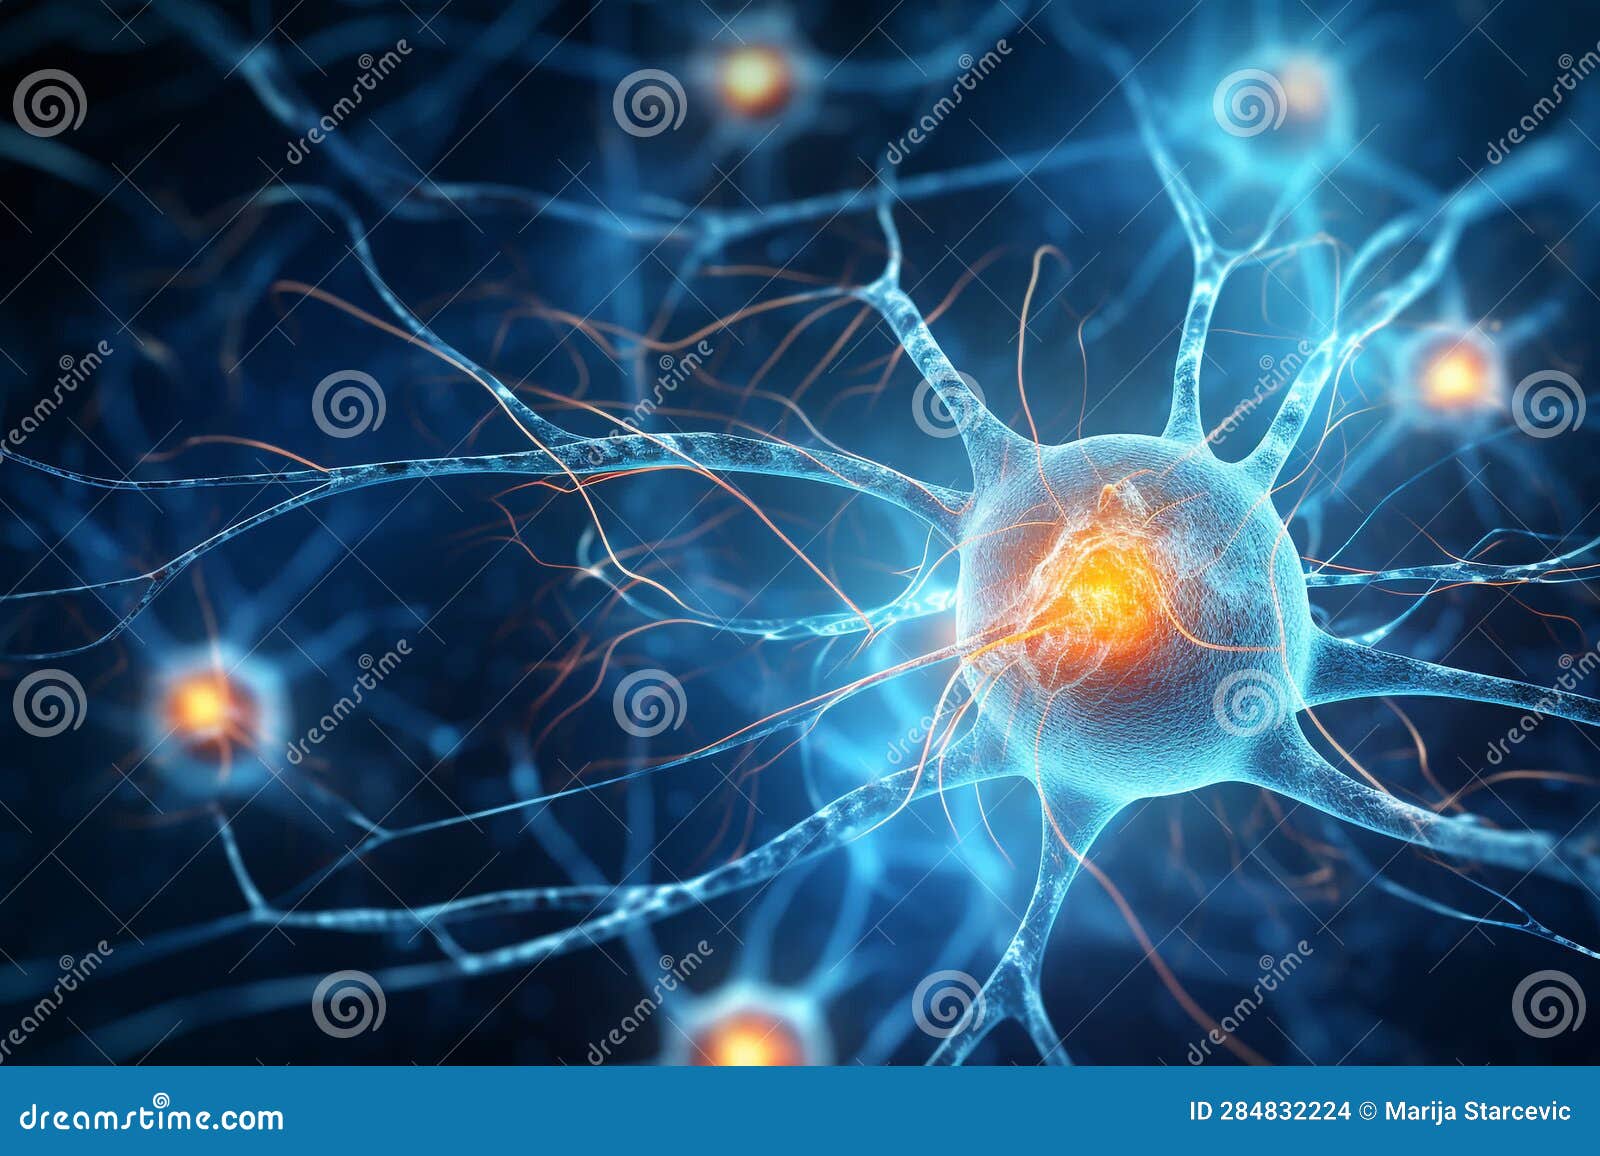 Active Nerve Cells.Human Brain Stimulation or Activity with Neuron ...